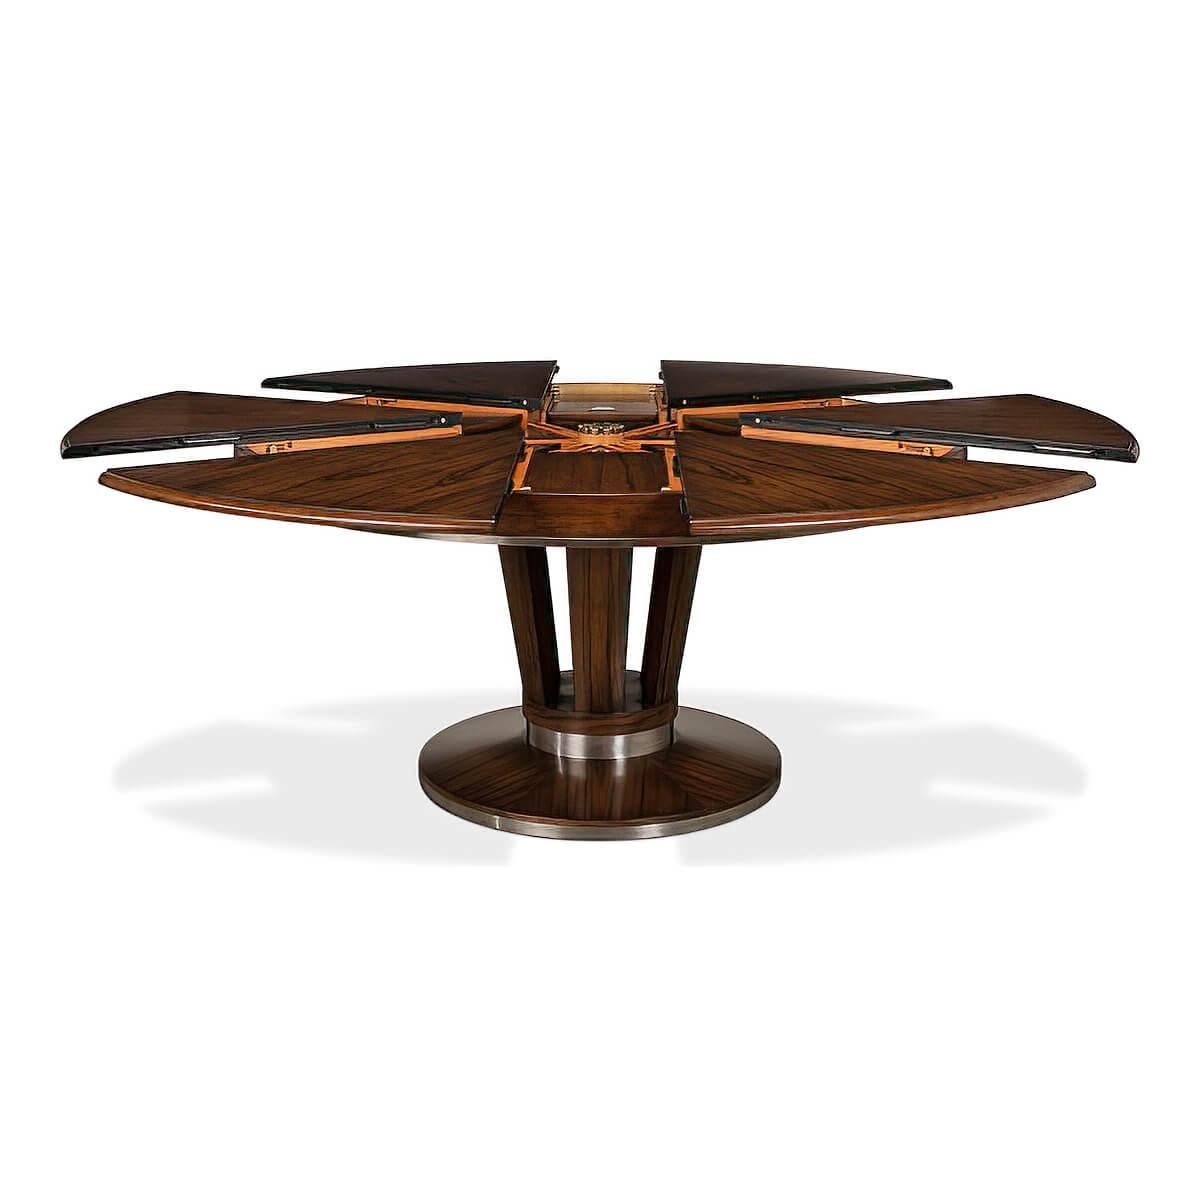 Art Deco Style extension table crafted of solid walnut and a Paldeo veneered top. The pedestal features six convex members resting on a circular base enhanced by antique stainless steel bands.

Dimensions: 84